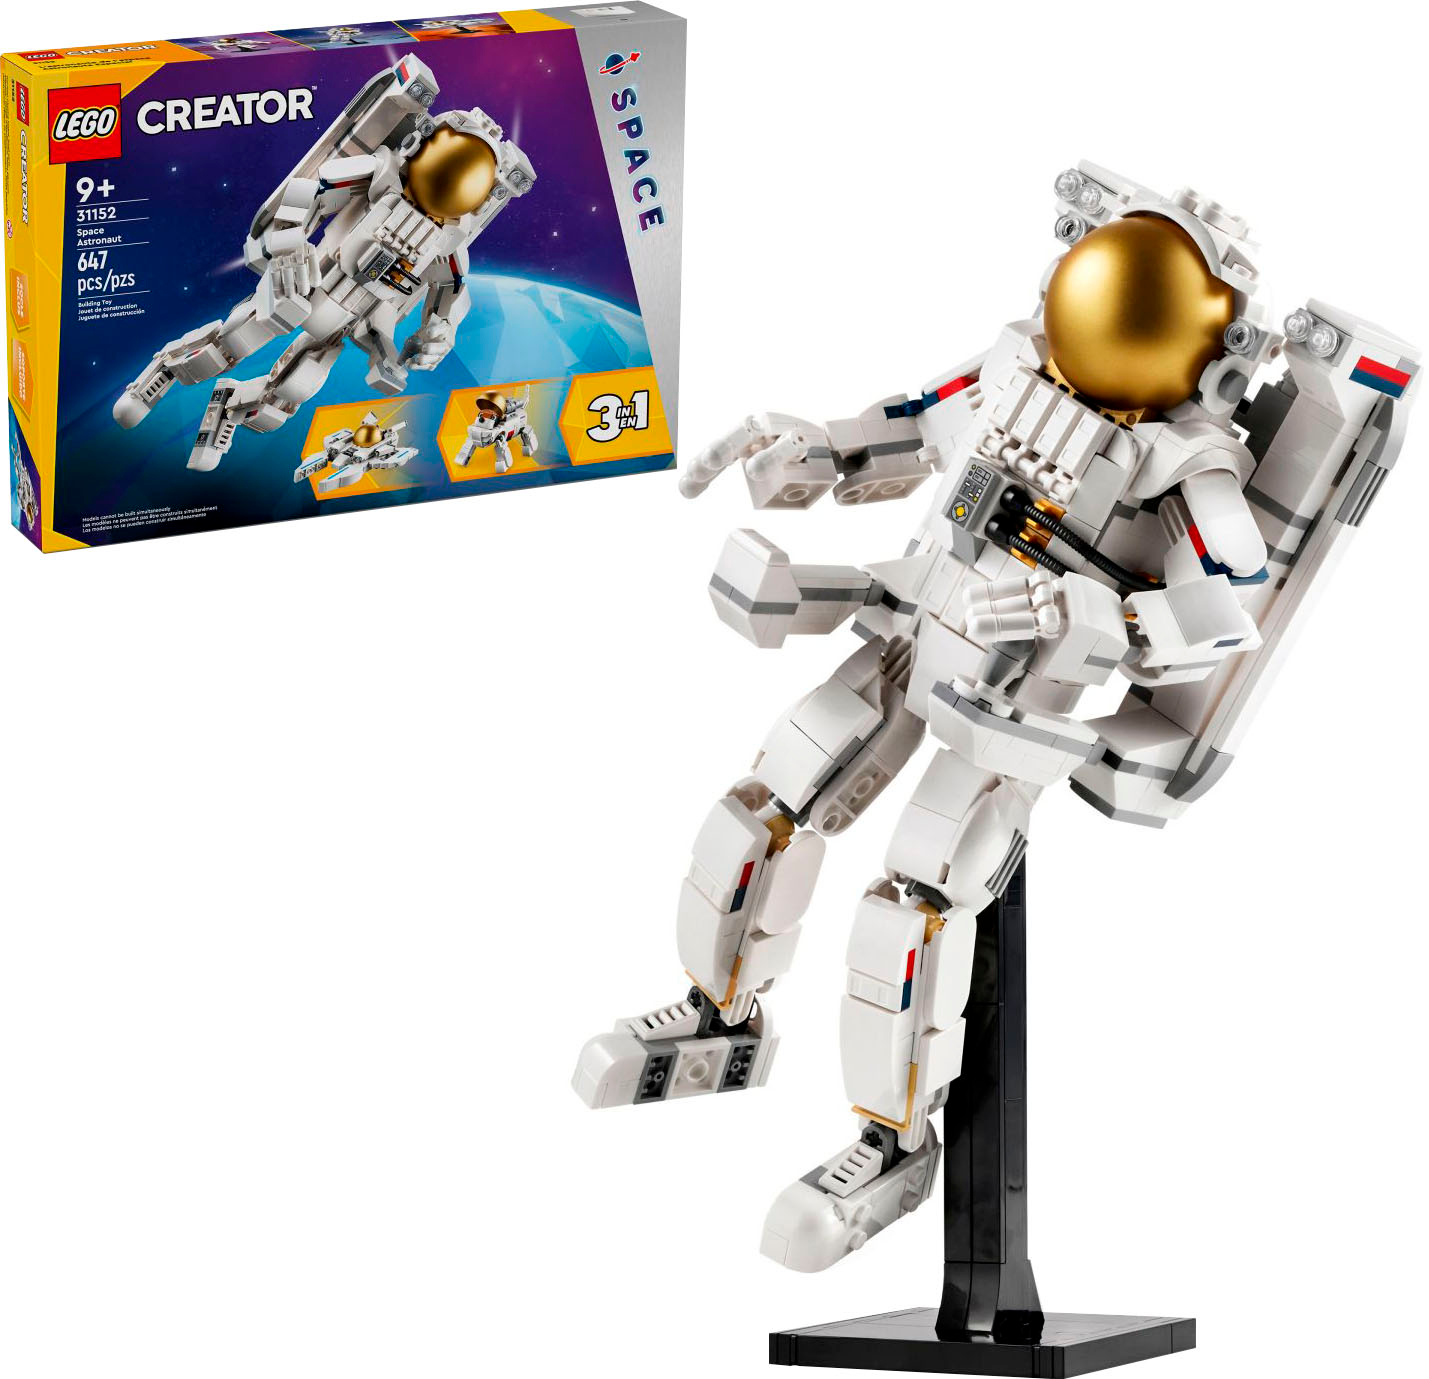 LEGO Creator 3 in 1 Space Astronaut Toy Set, Science Toy for Kids